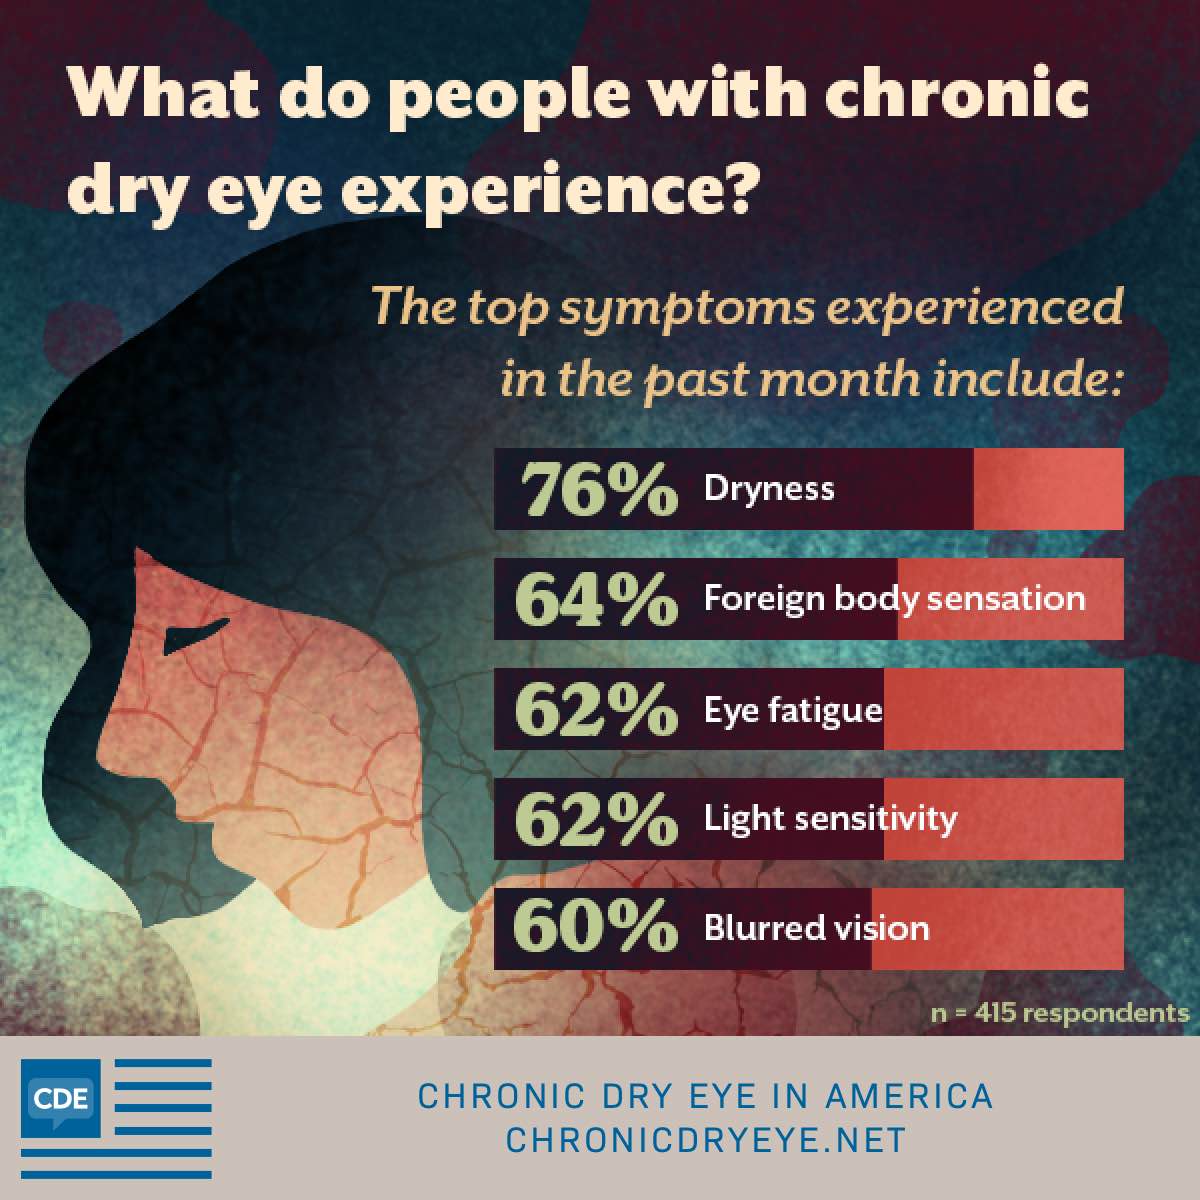 the most common chronic dry eye symptoms include dryness and foreign body sensation